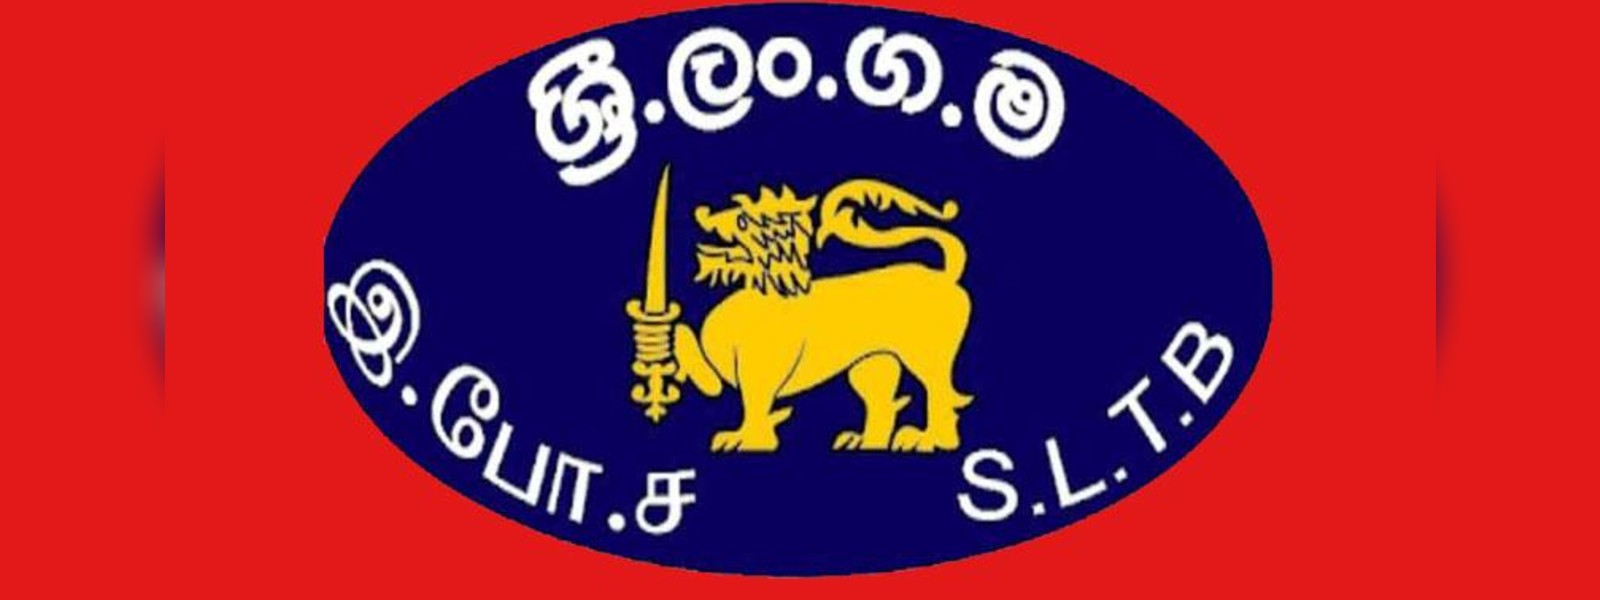 SLTB daily income drops by Rs. 30 million